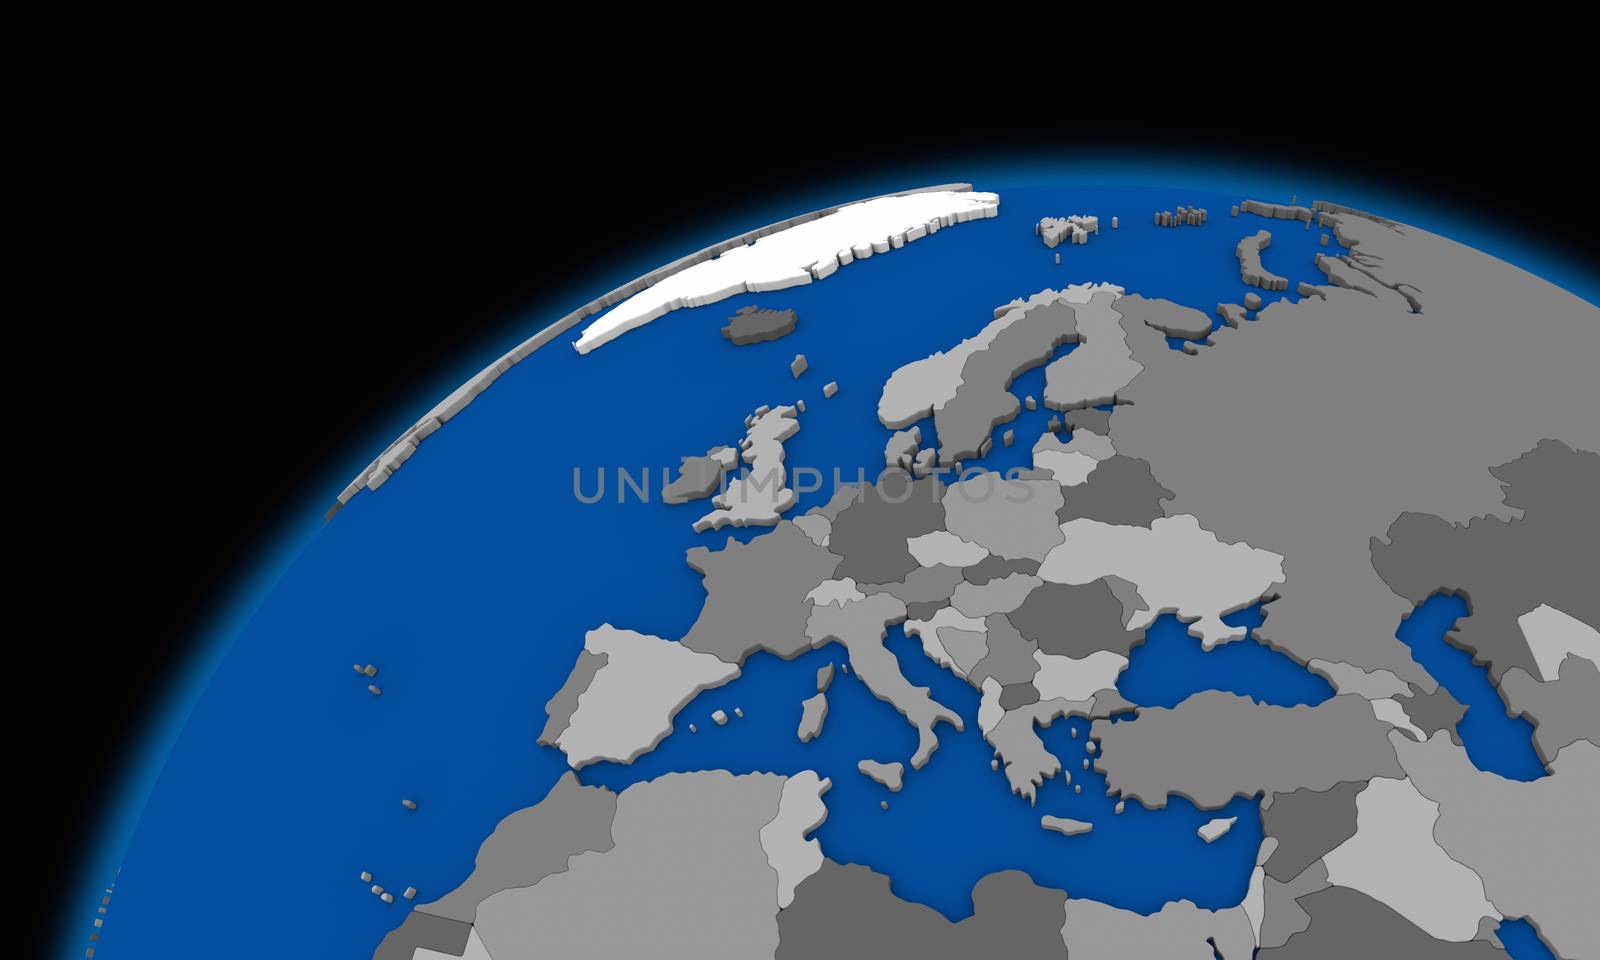 Europe on planet Earth political map by Harvepino